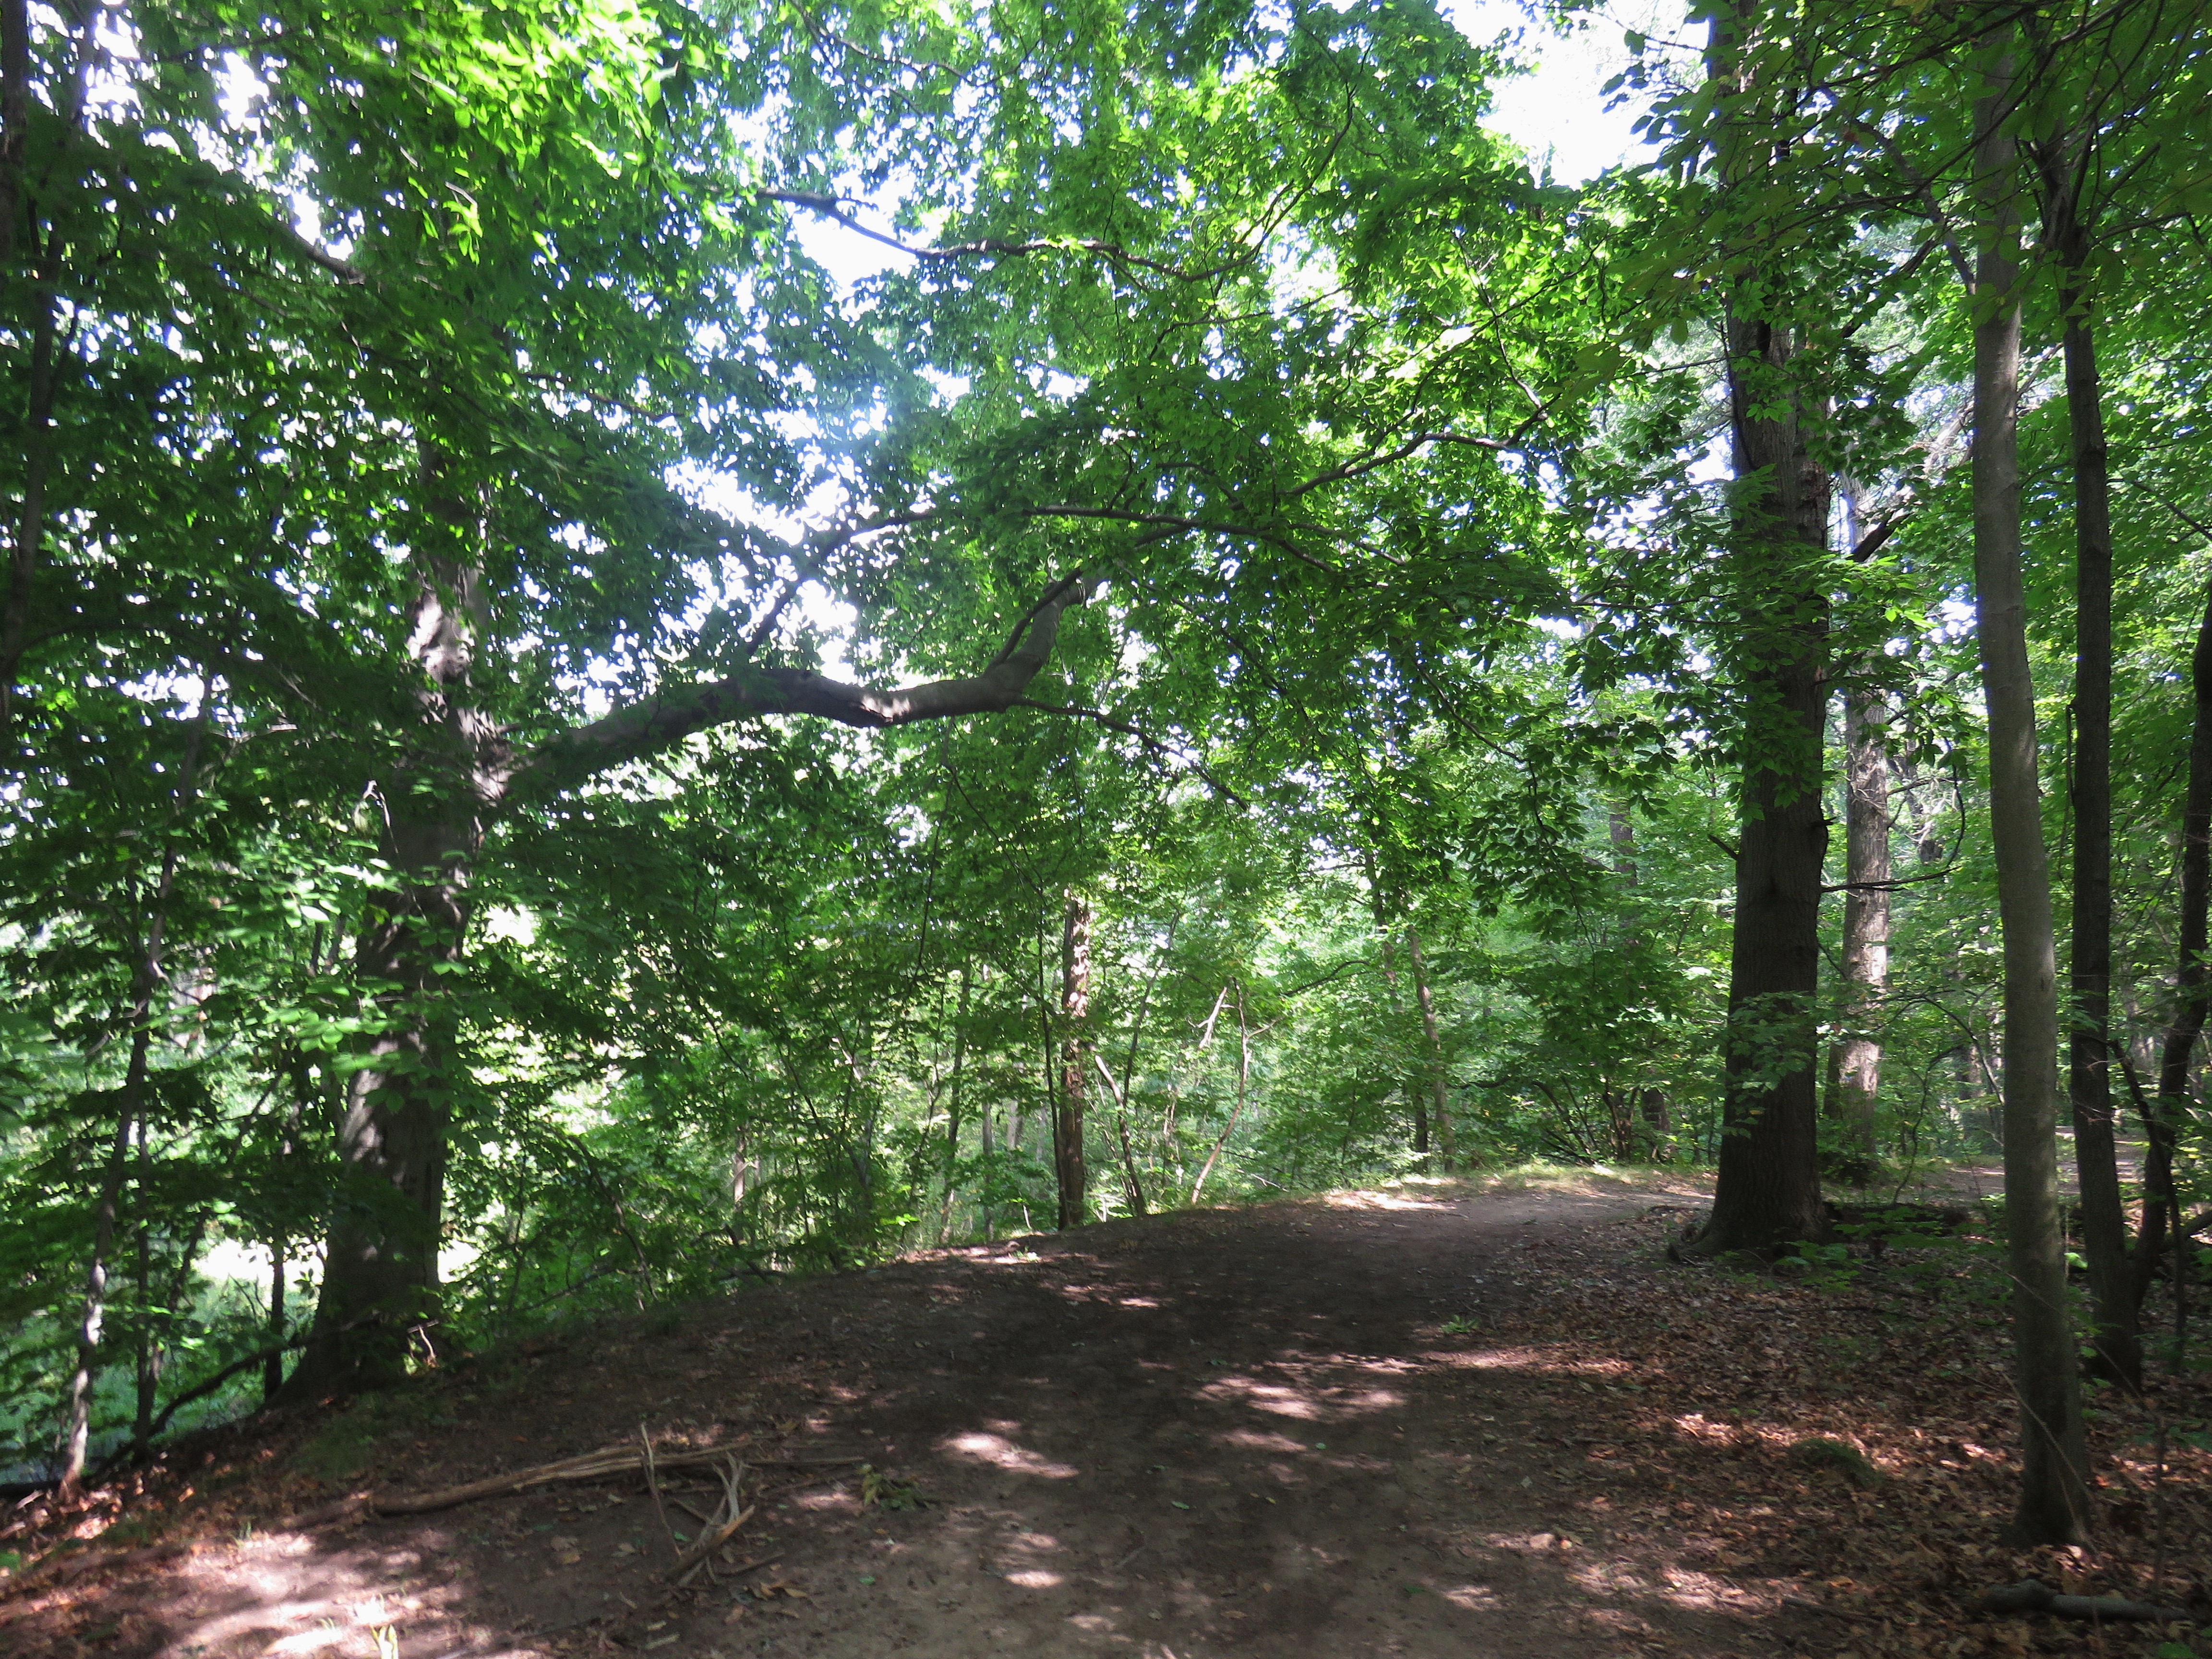 A dirt path surrounded on both sides by trees with green foliage. The leaves and branches create a canopy over the top. Bits of blue sky and white clouds can be seen through the foliage.